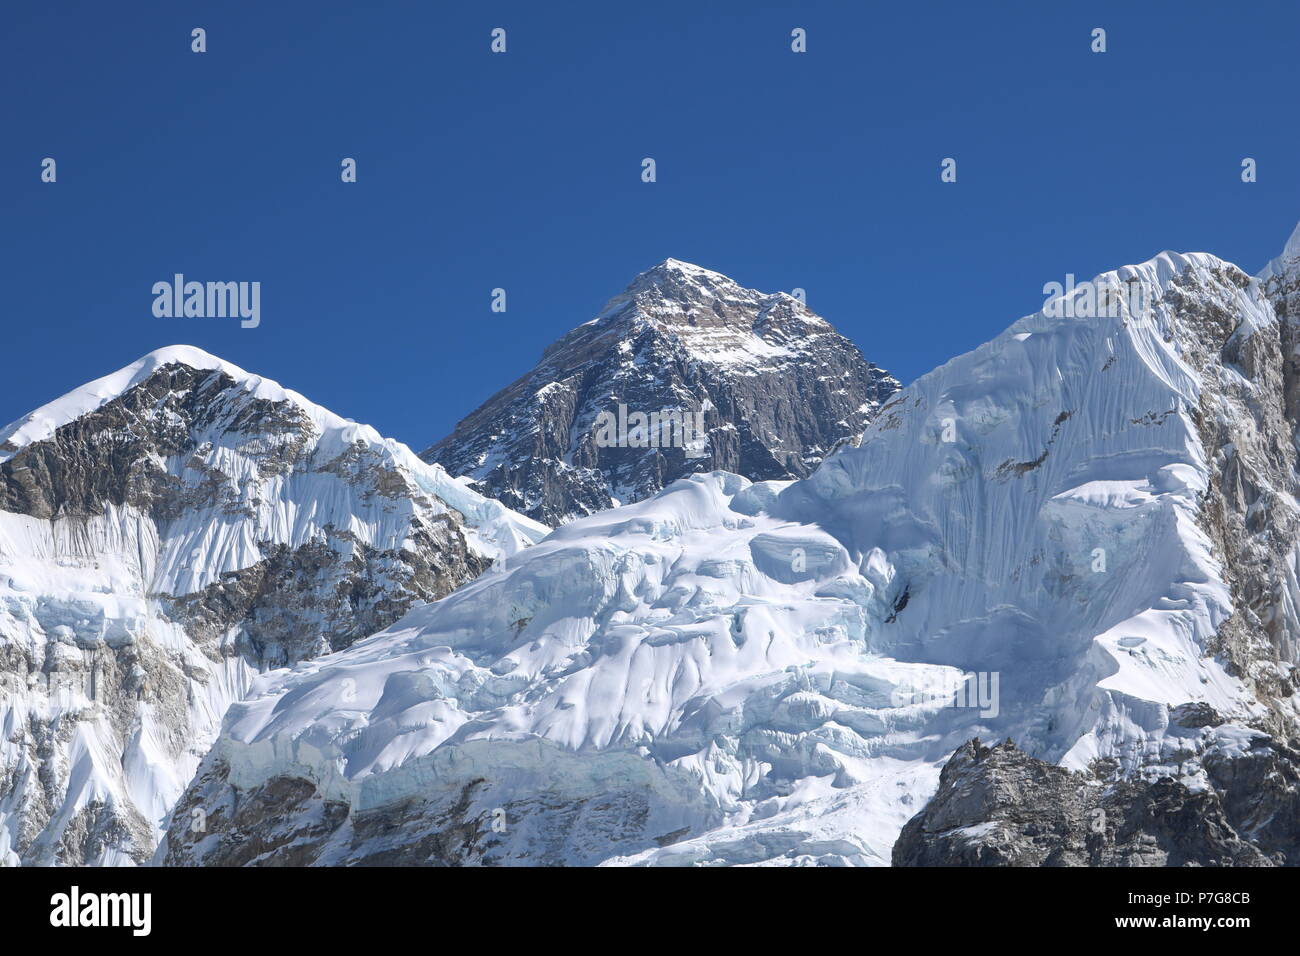 Amazing Shot of Nepalese himalayas mountain peaks covered with white snow attract many climbers and mountaineers Stock Photo